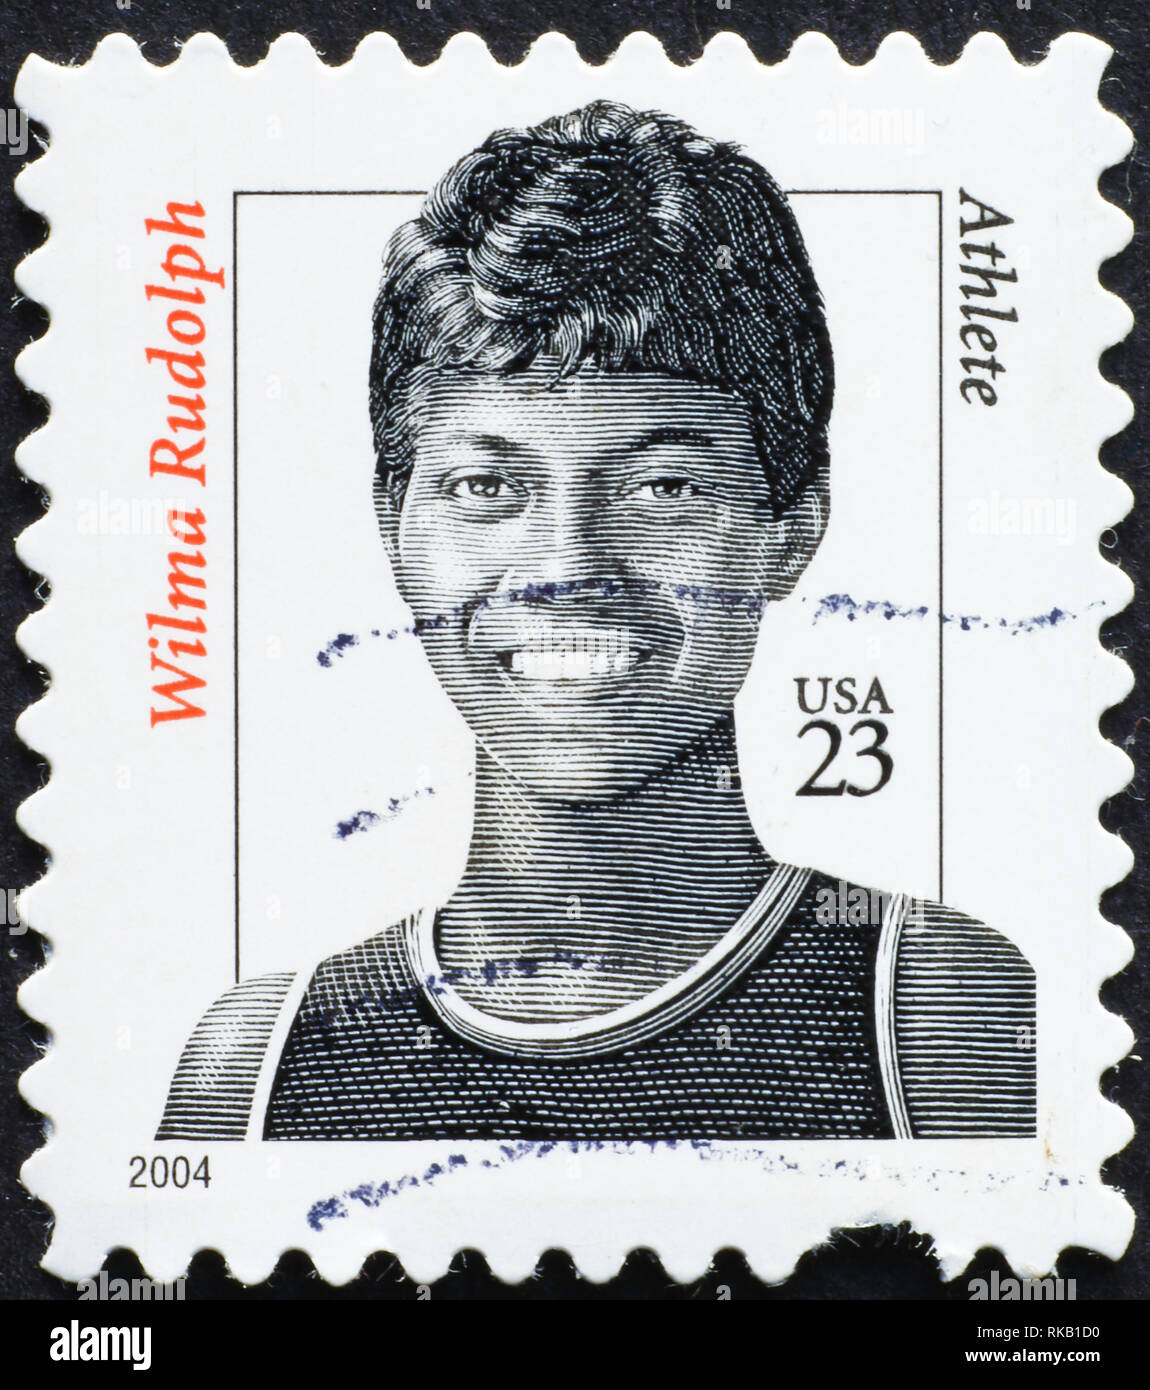 Wilma Rudolph on american postage stamp Stock Photo